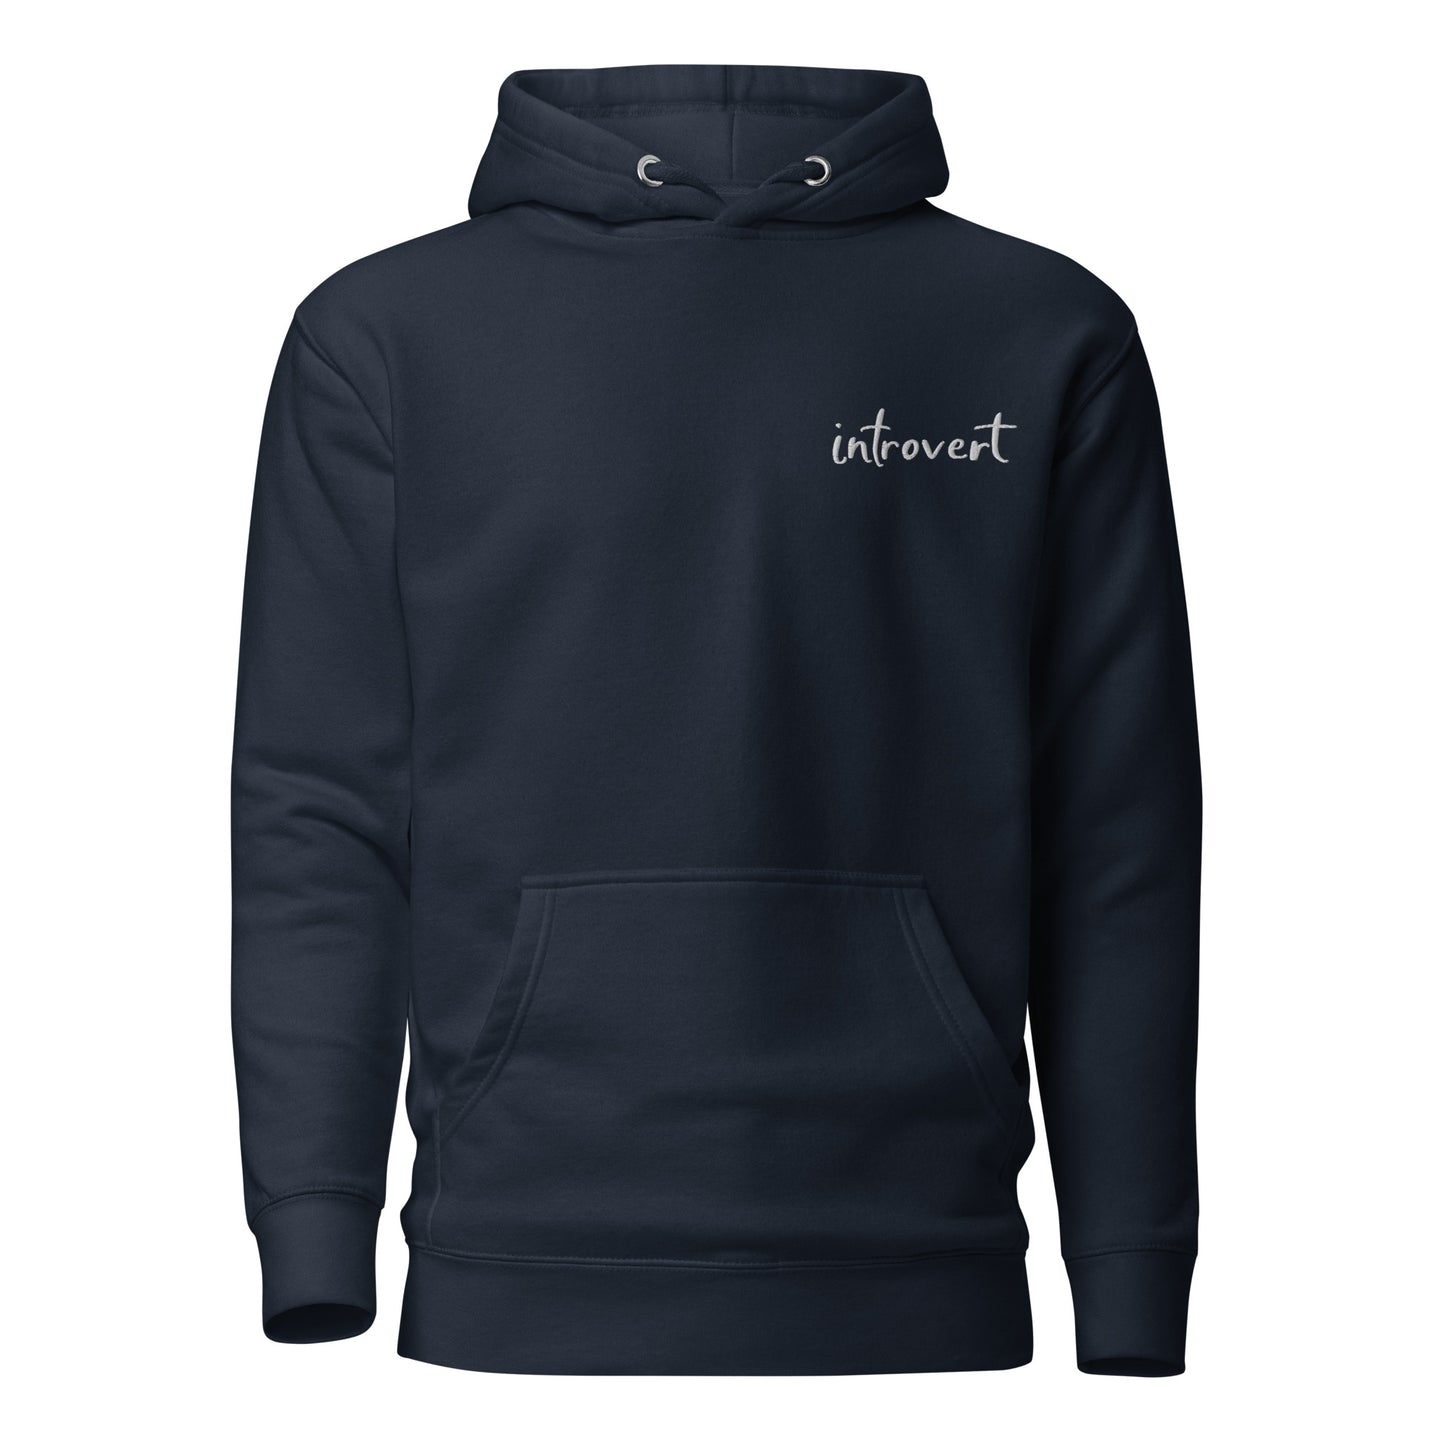 Embroidered Hoodie "introvert"